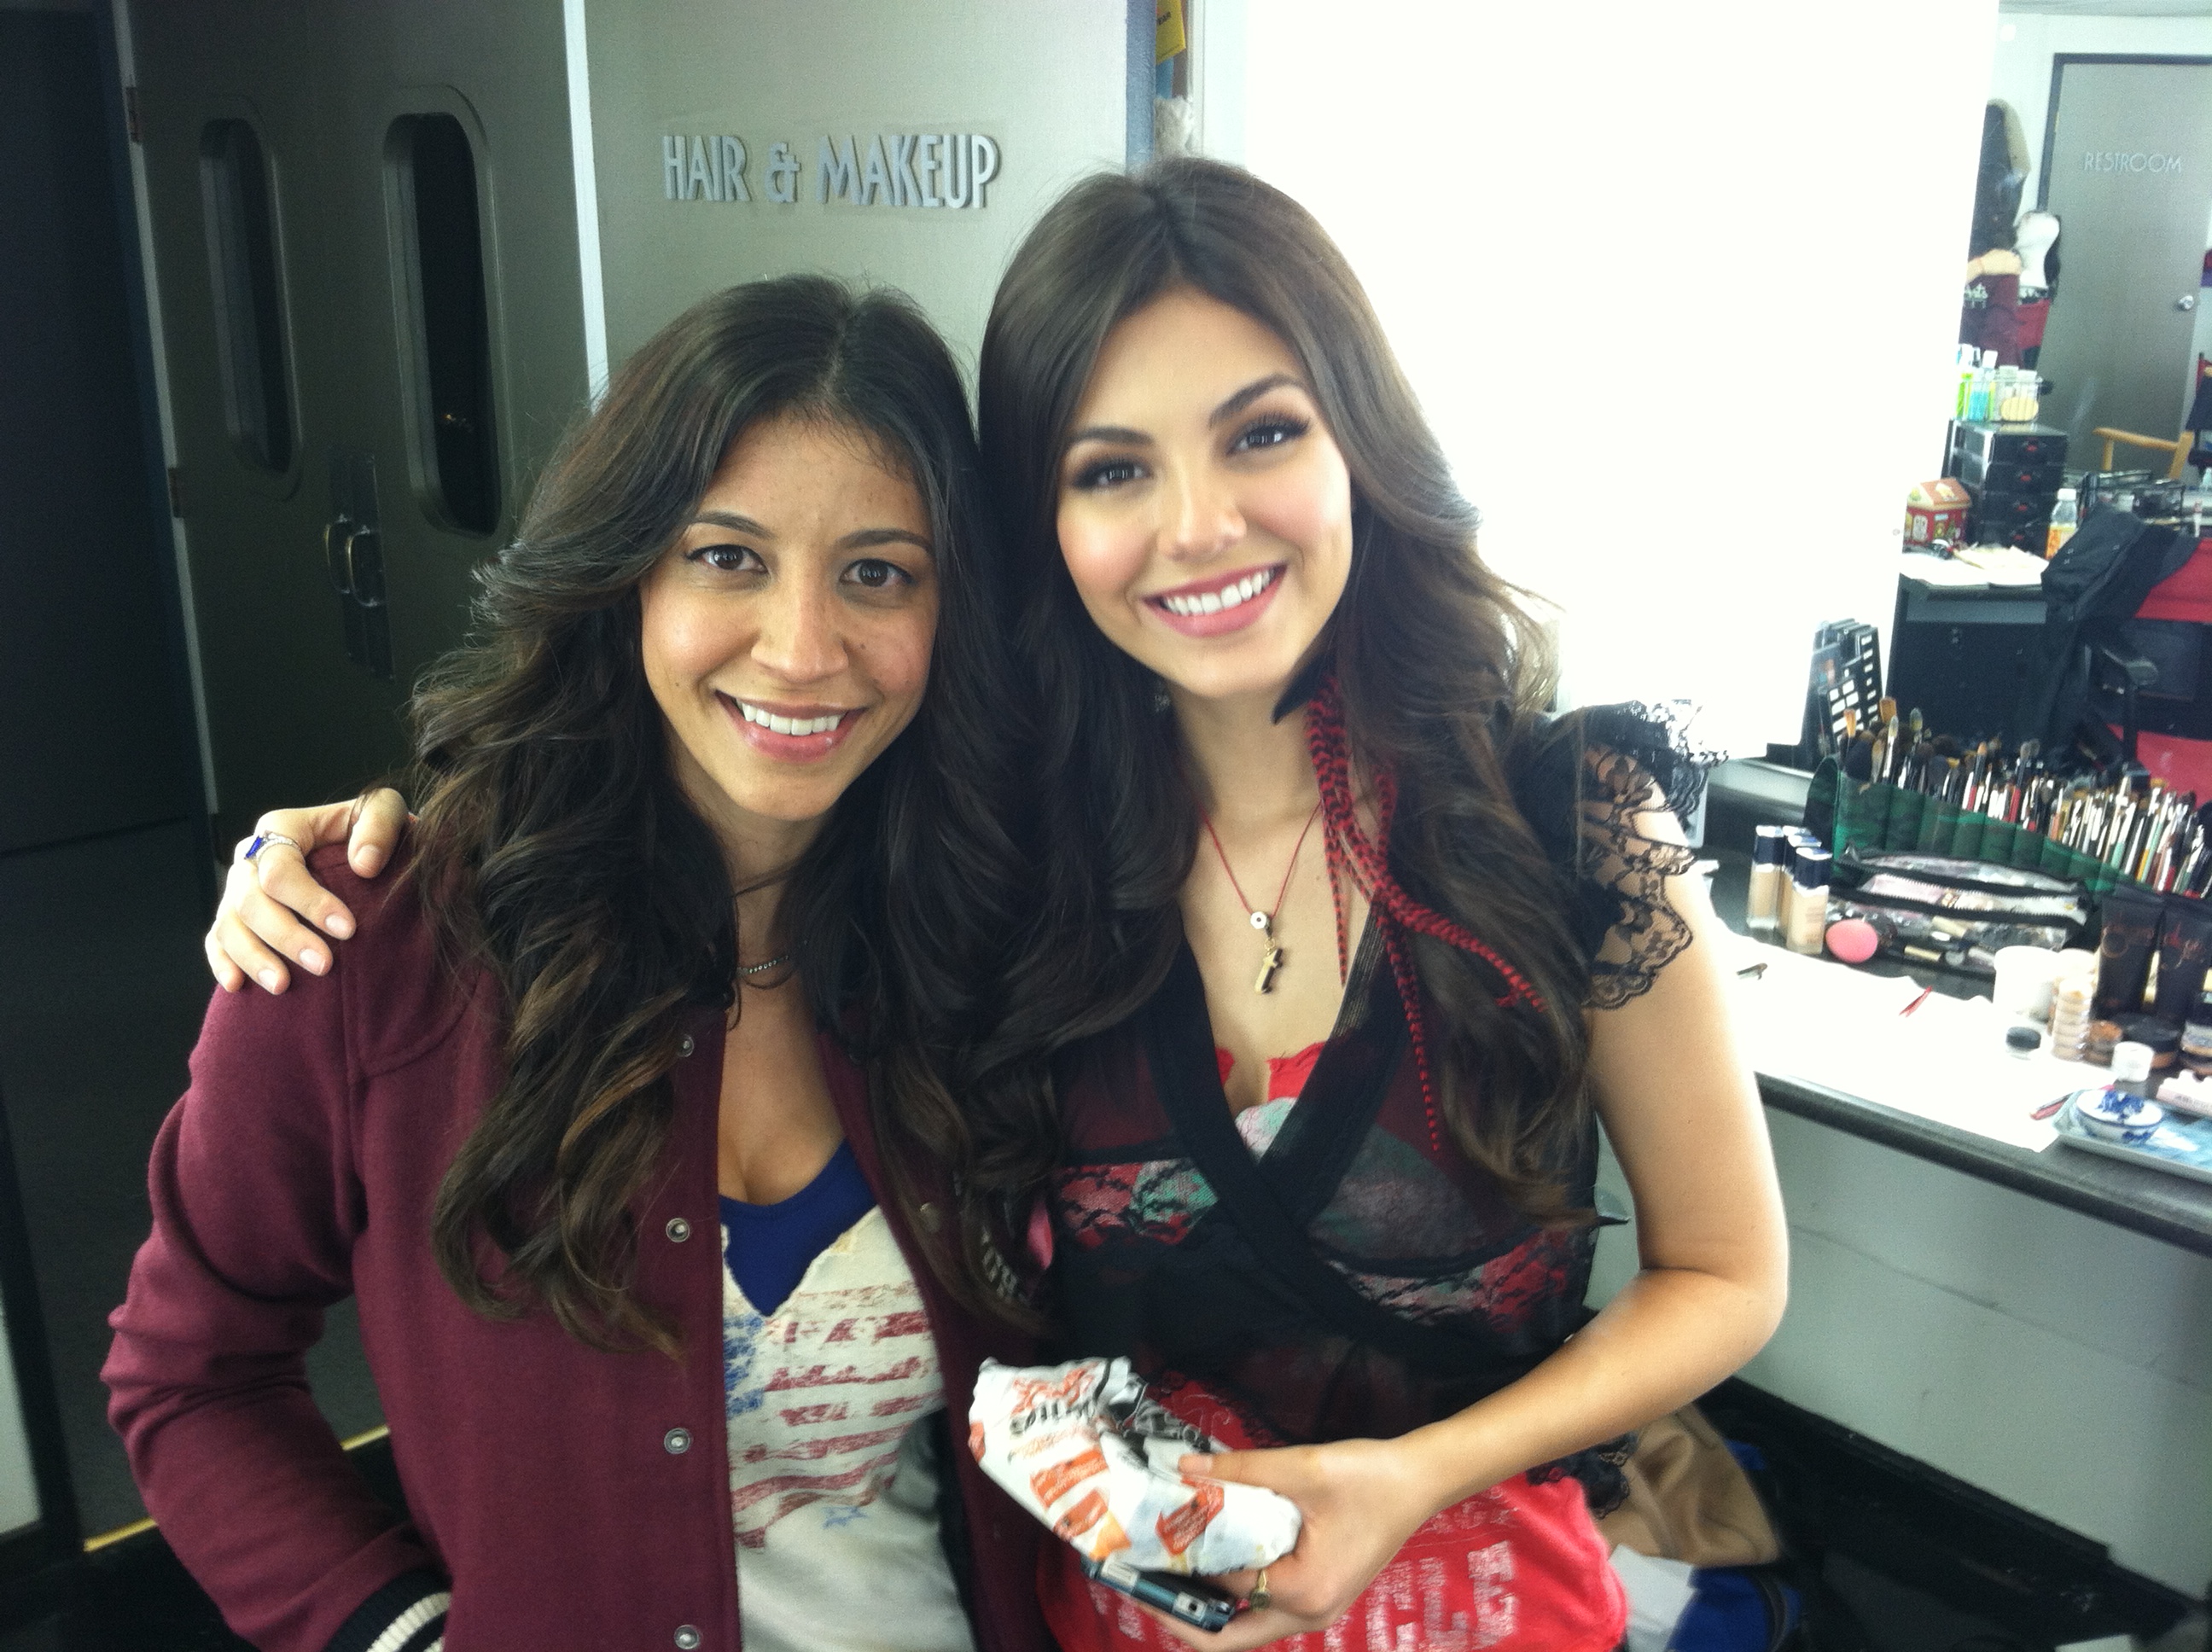 Stunt Doubling Victoria Justice, Victorious